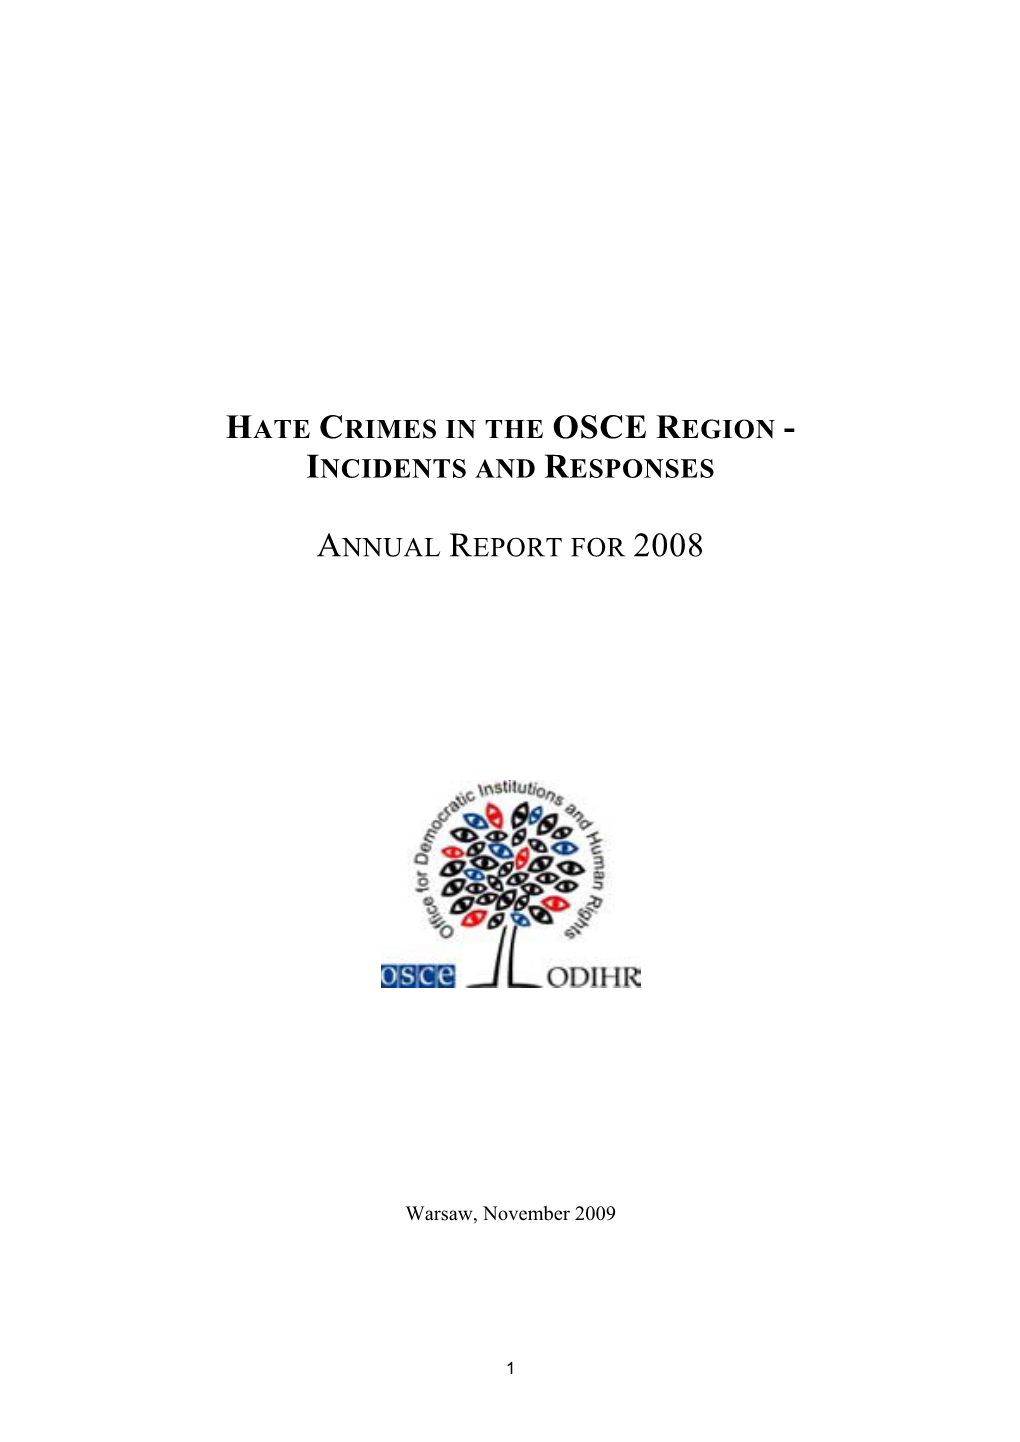 Hate Crimes in the Osce Region - Incidents and Responses